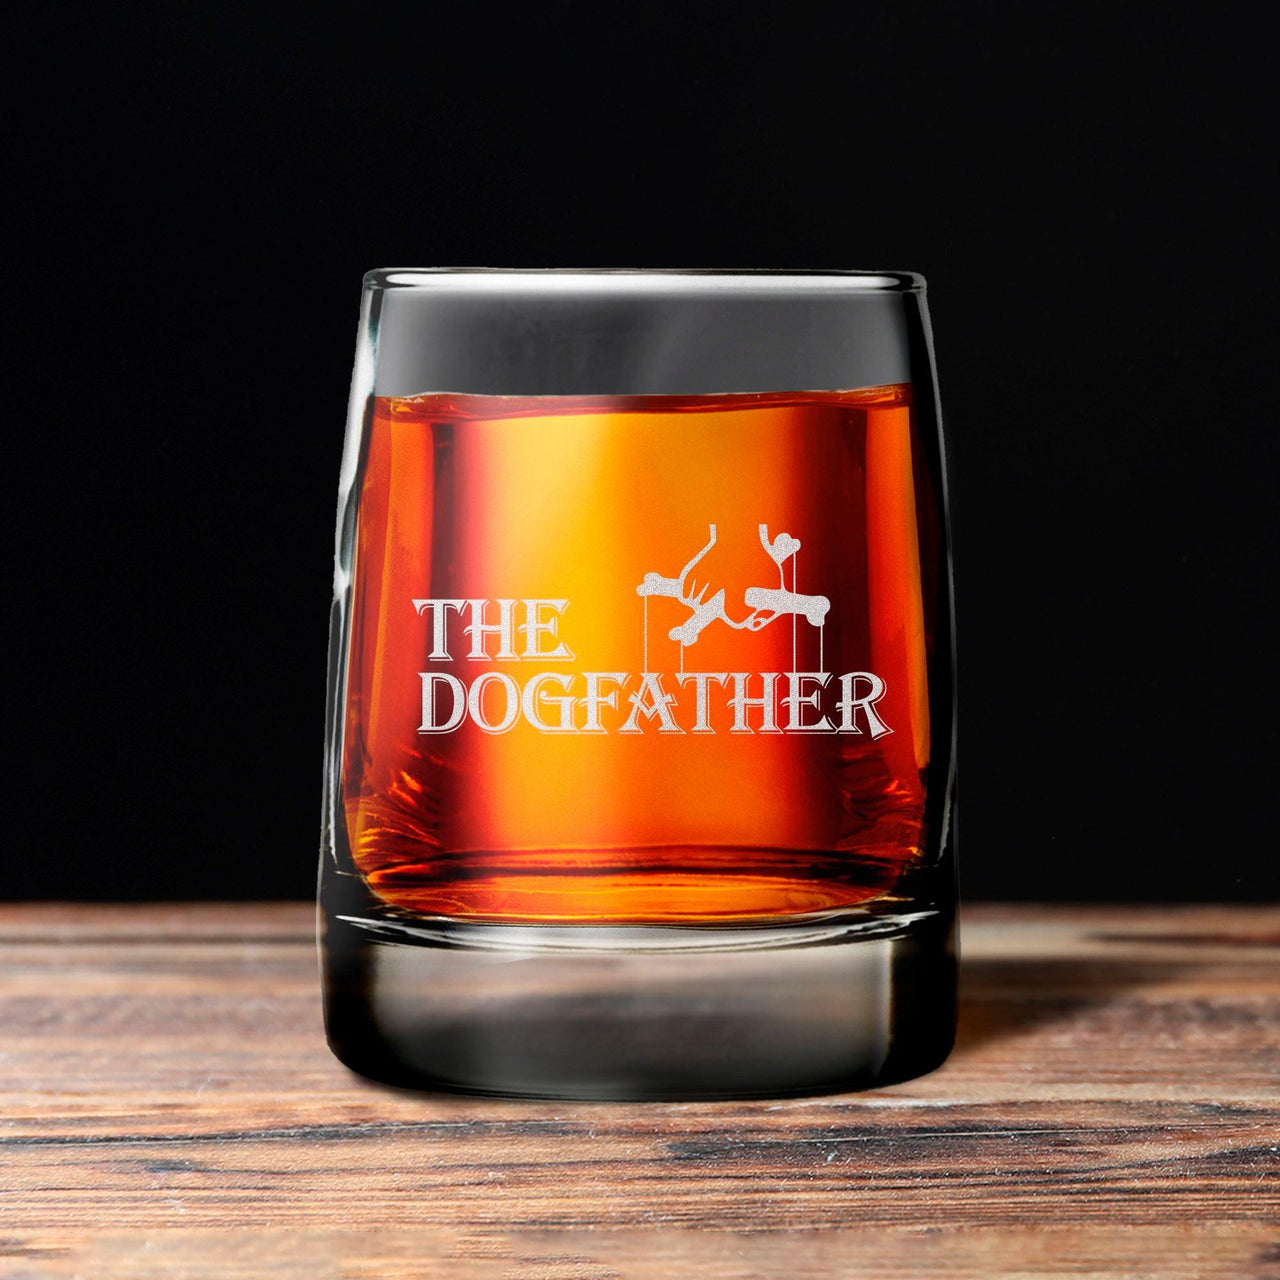 Old Fashioned 12 oz Whiskey Glass - Dad's Gift Personalized Drink Broquet The DogFather 